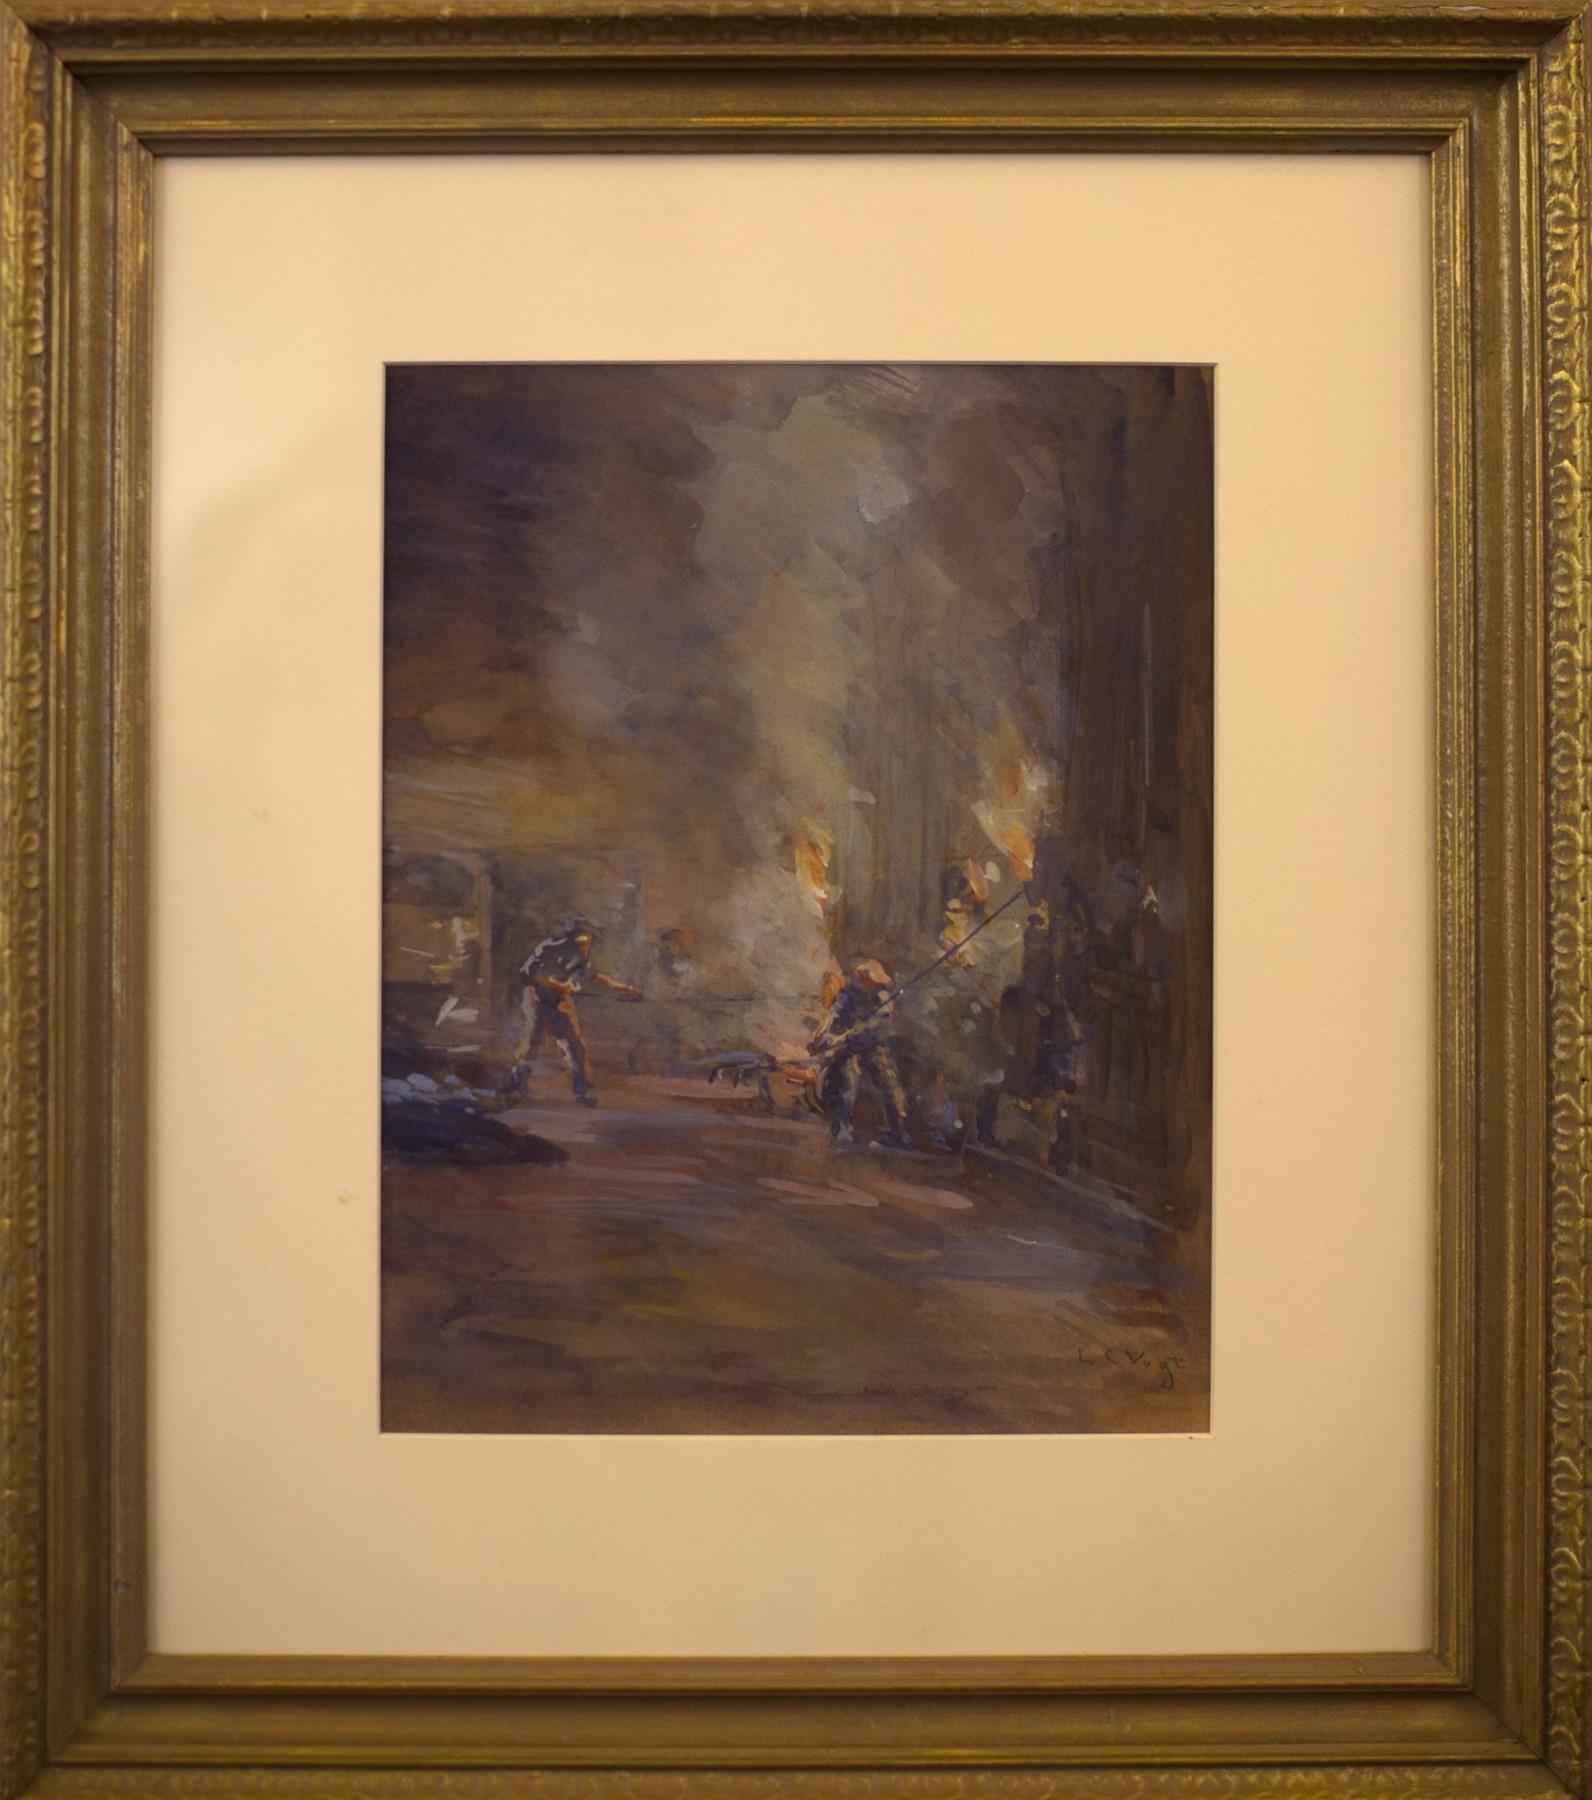 Painting by Vogt of men working at a furnace.